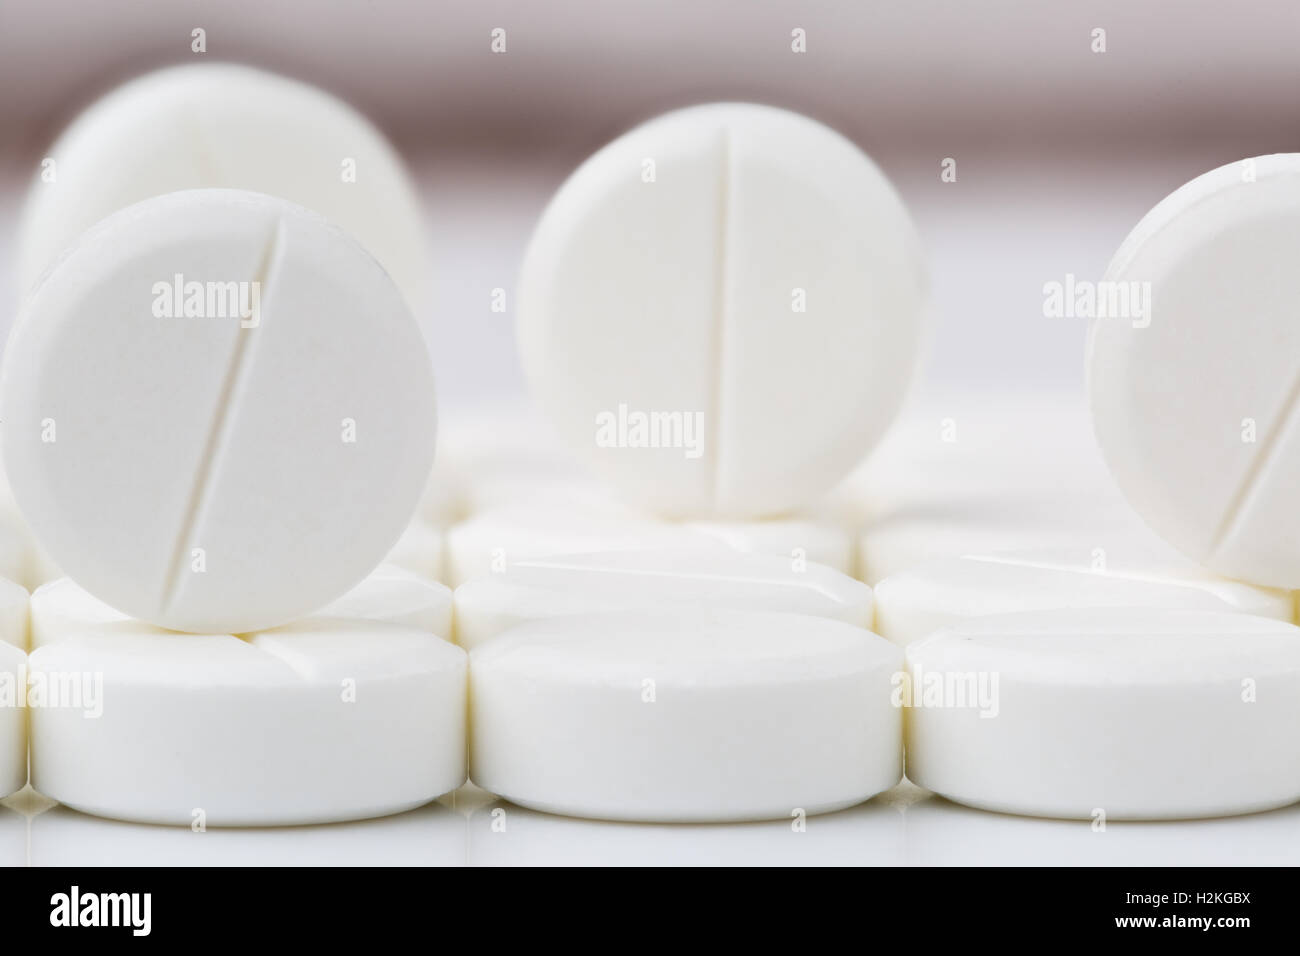 Heap of round white pills and tablets Stock Photo